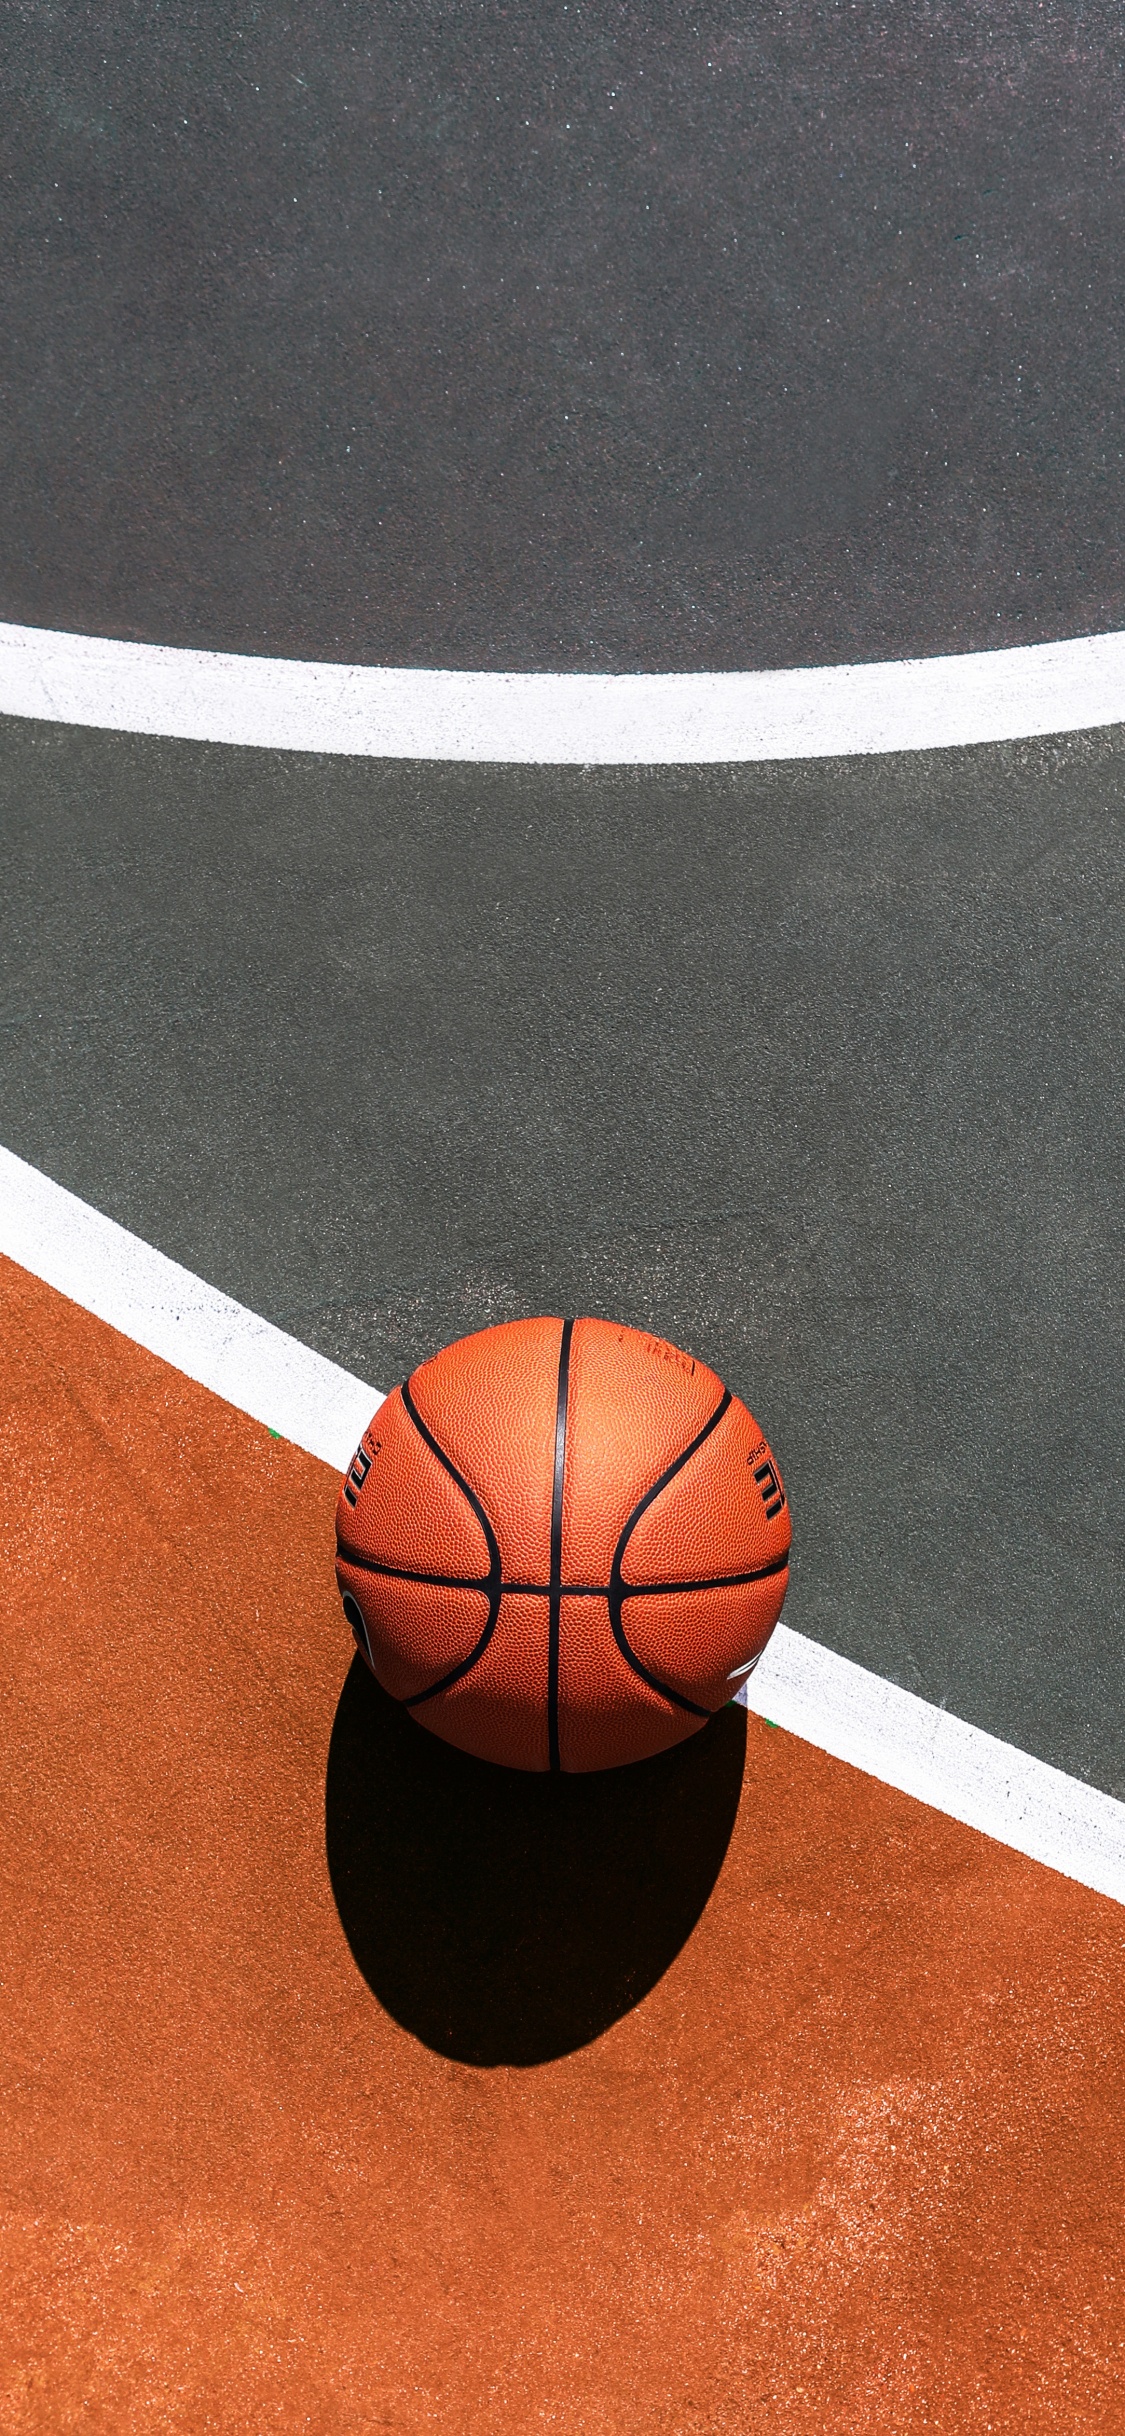 Basketball on Blue and White Basketball Court. Wallpaper in 1125x2436 Resolution